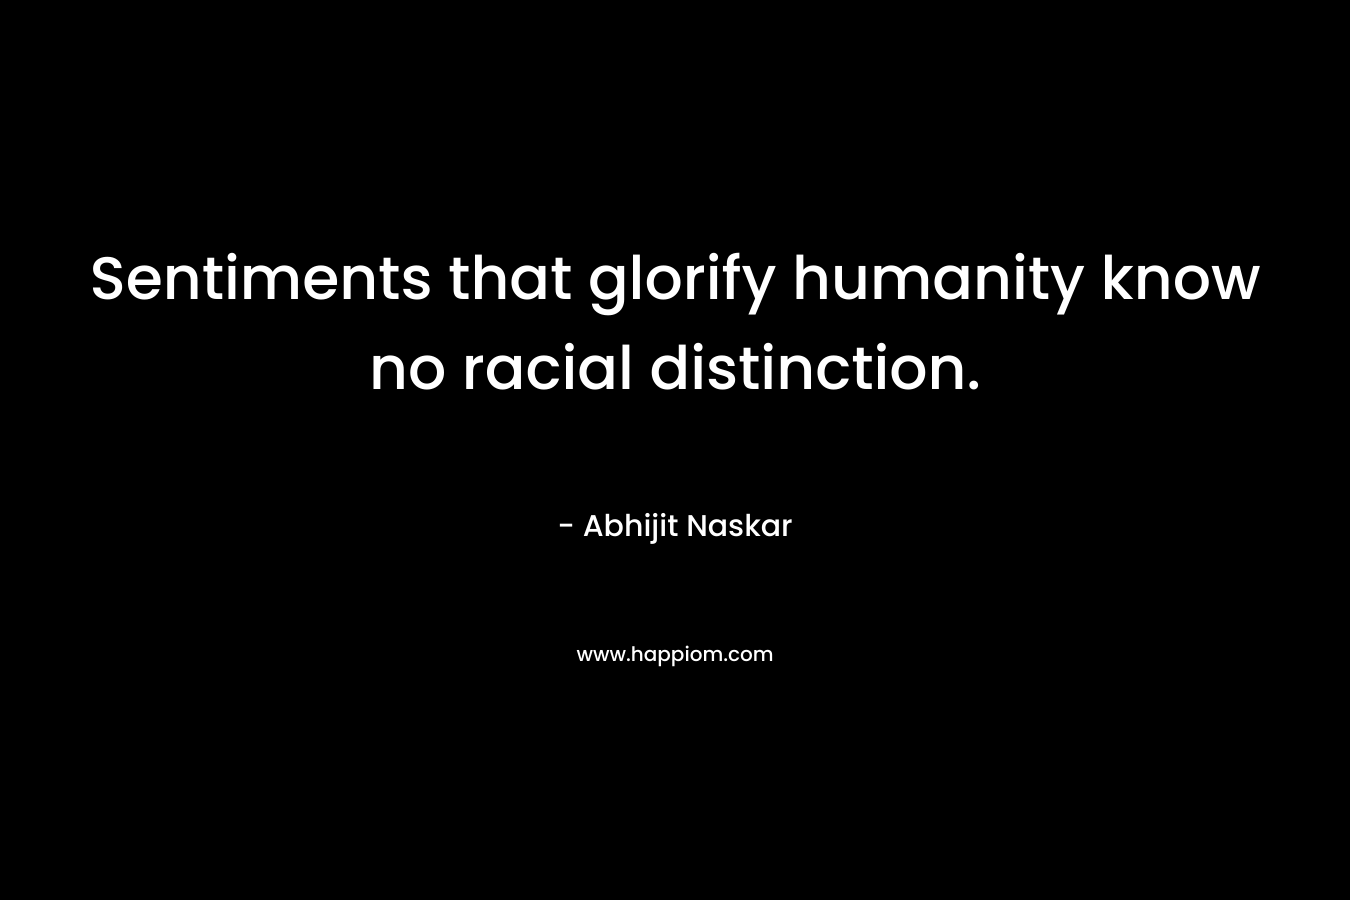 Sentiments that glorify humanity know no racial distinction.